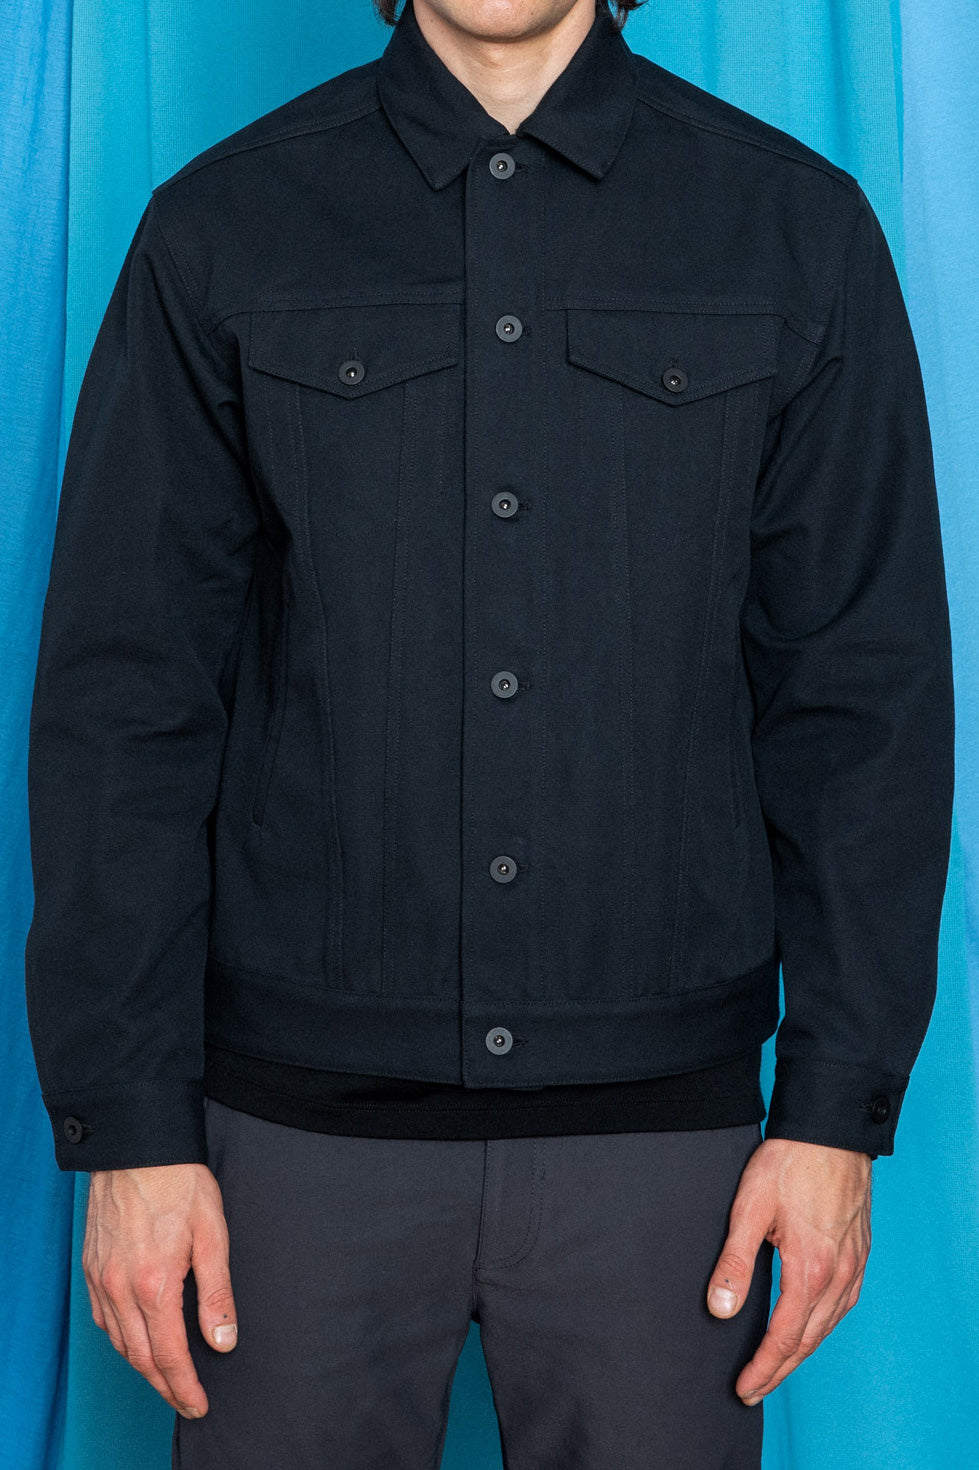 Waist up fit image of Daniele wearing the Duckcloth Shank Jacket in Black